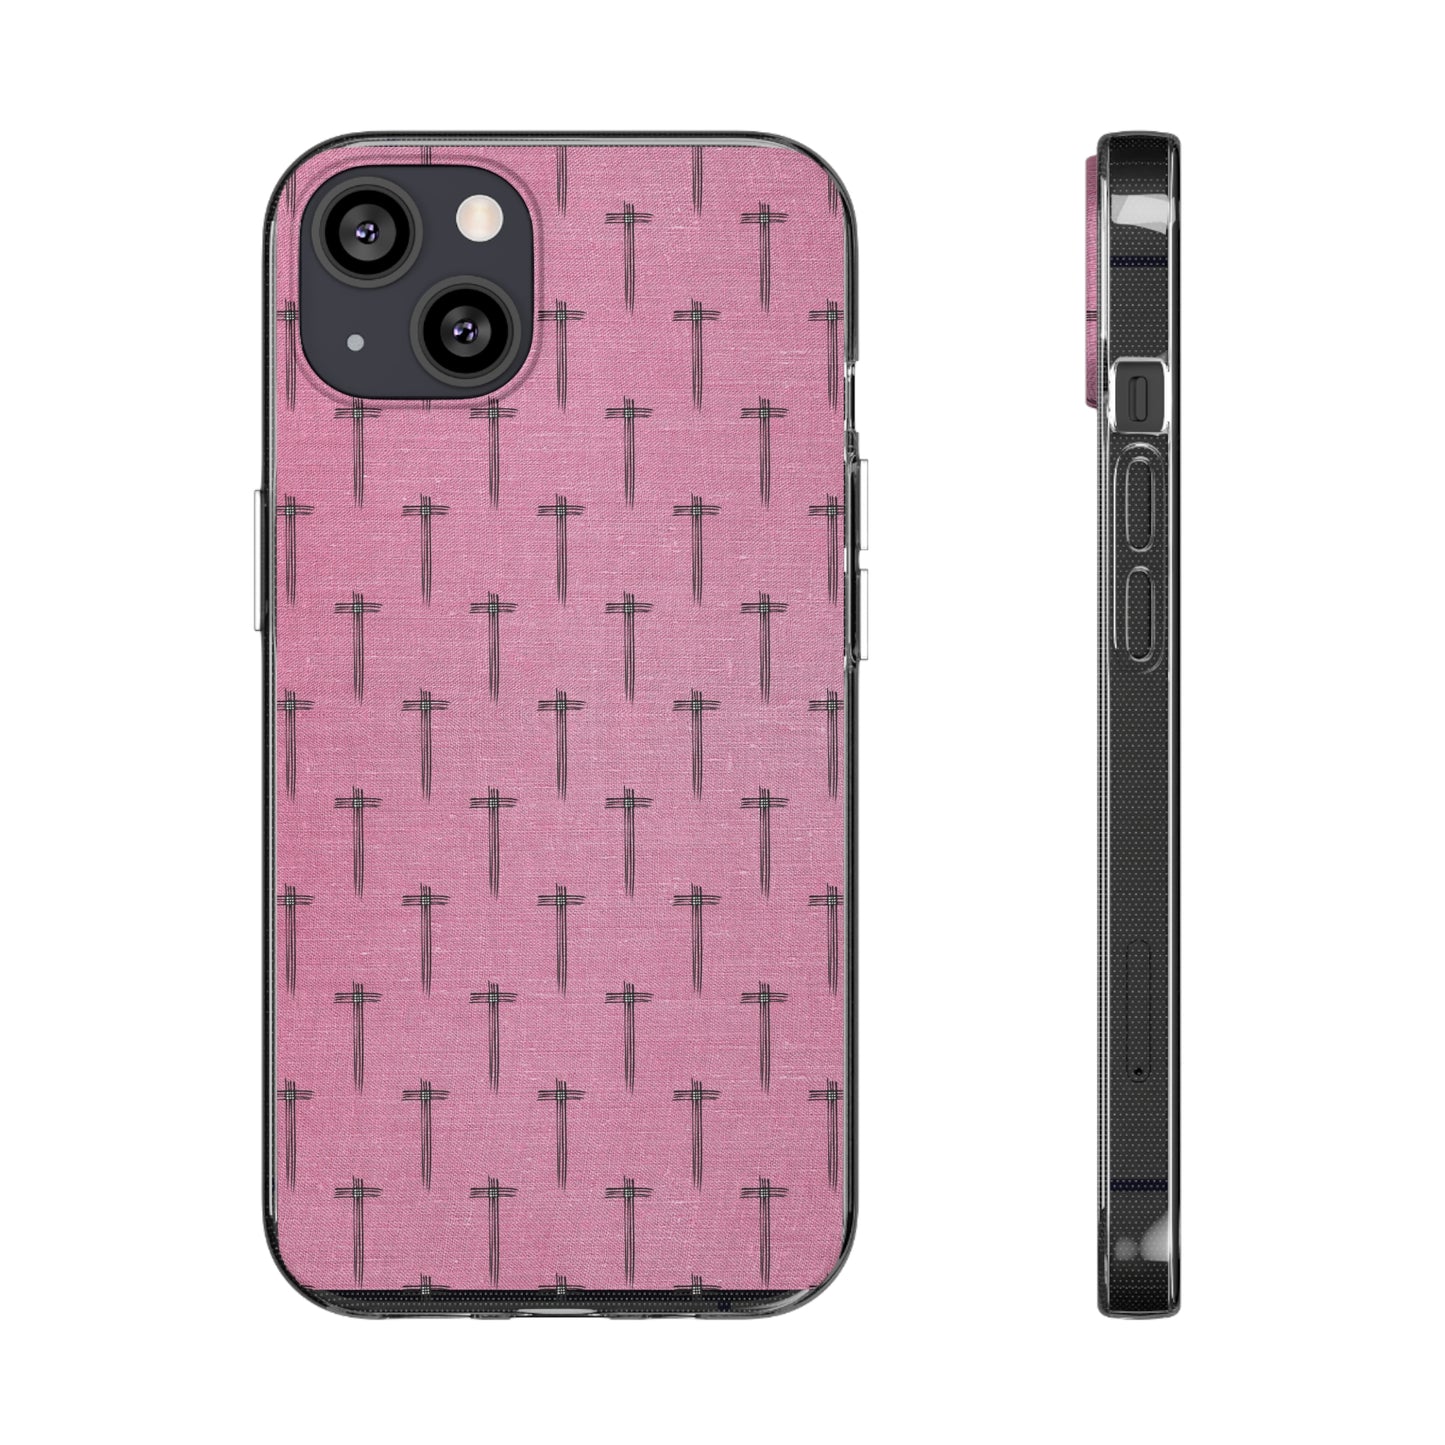 Cross Cross Clear Silicone Phone Case